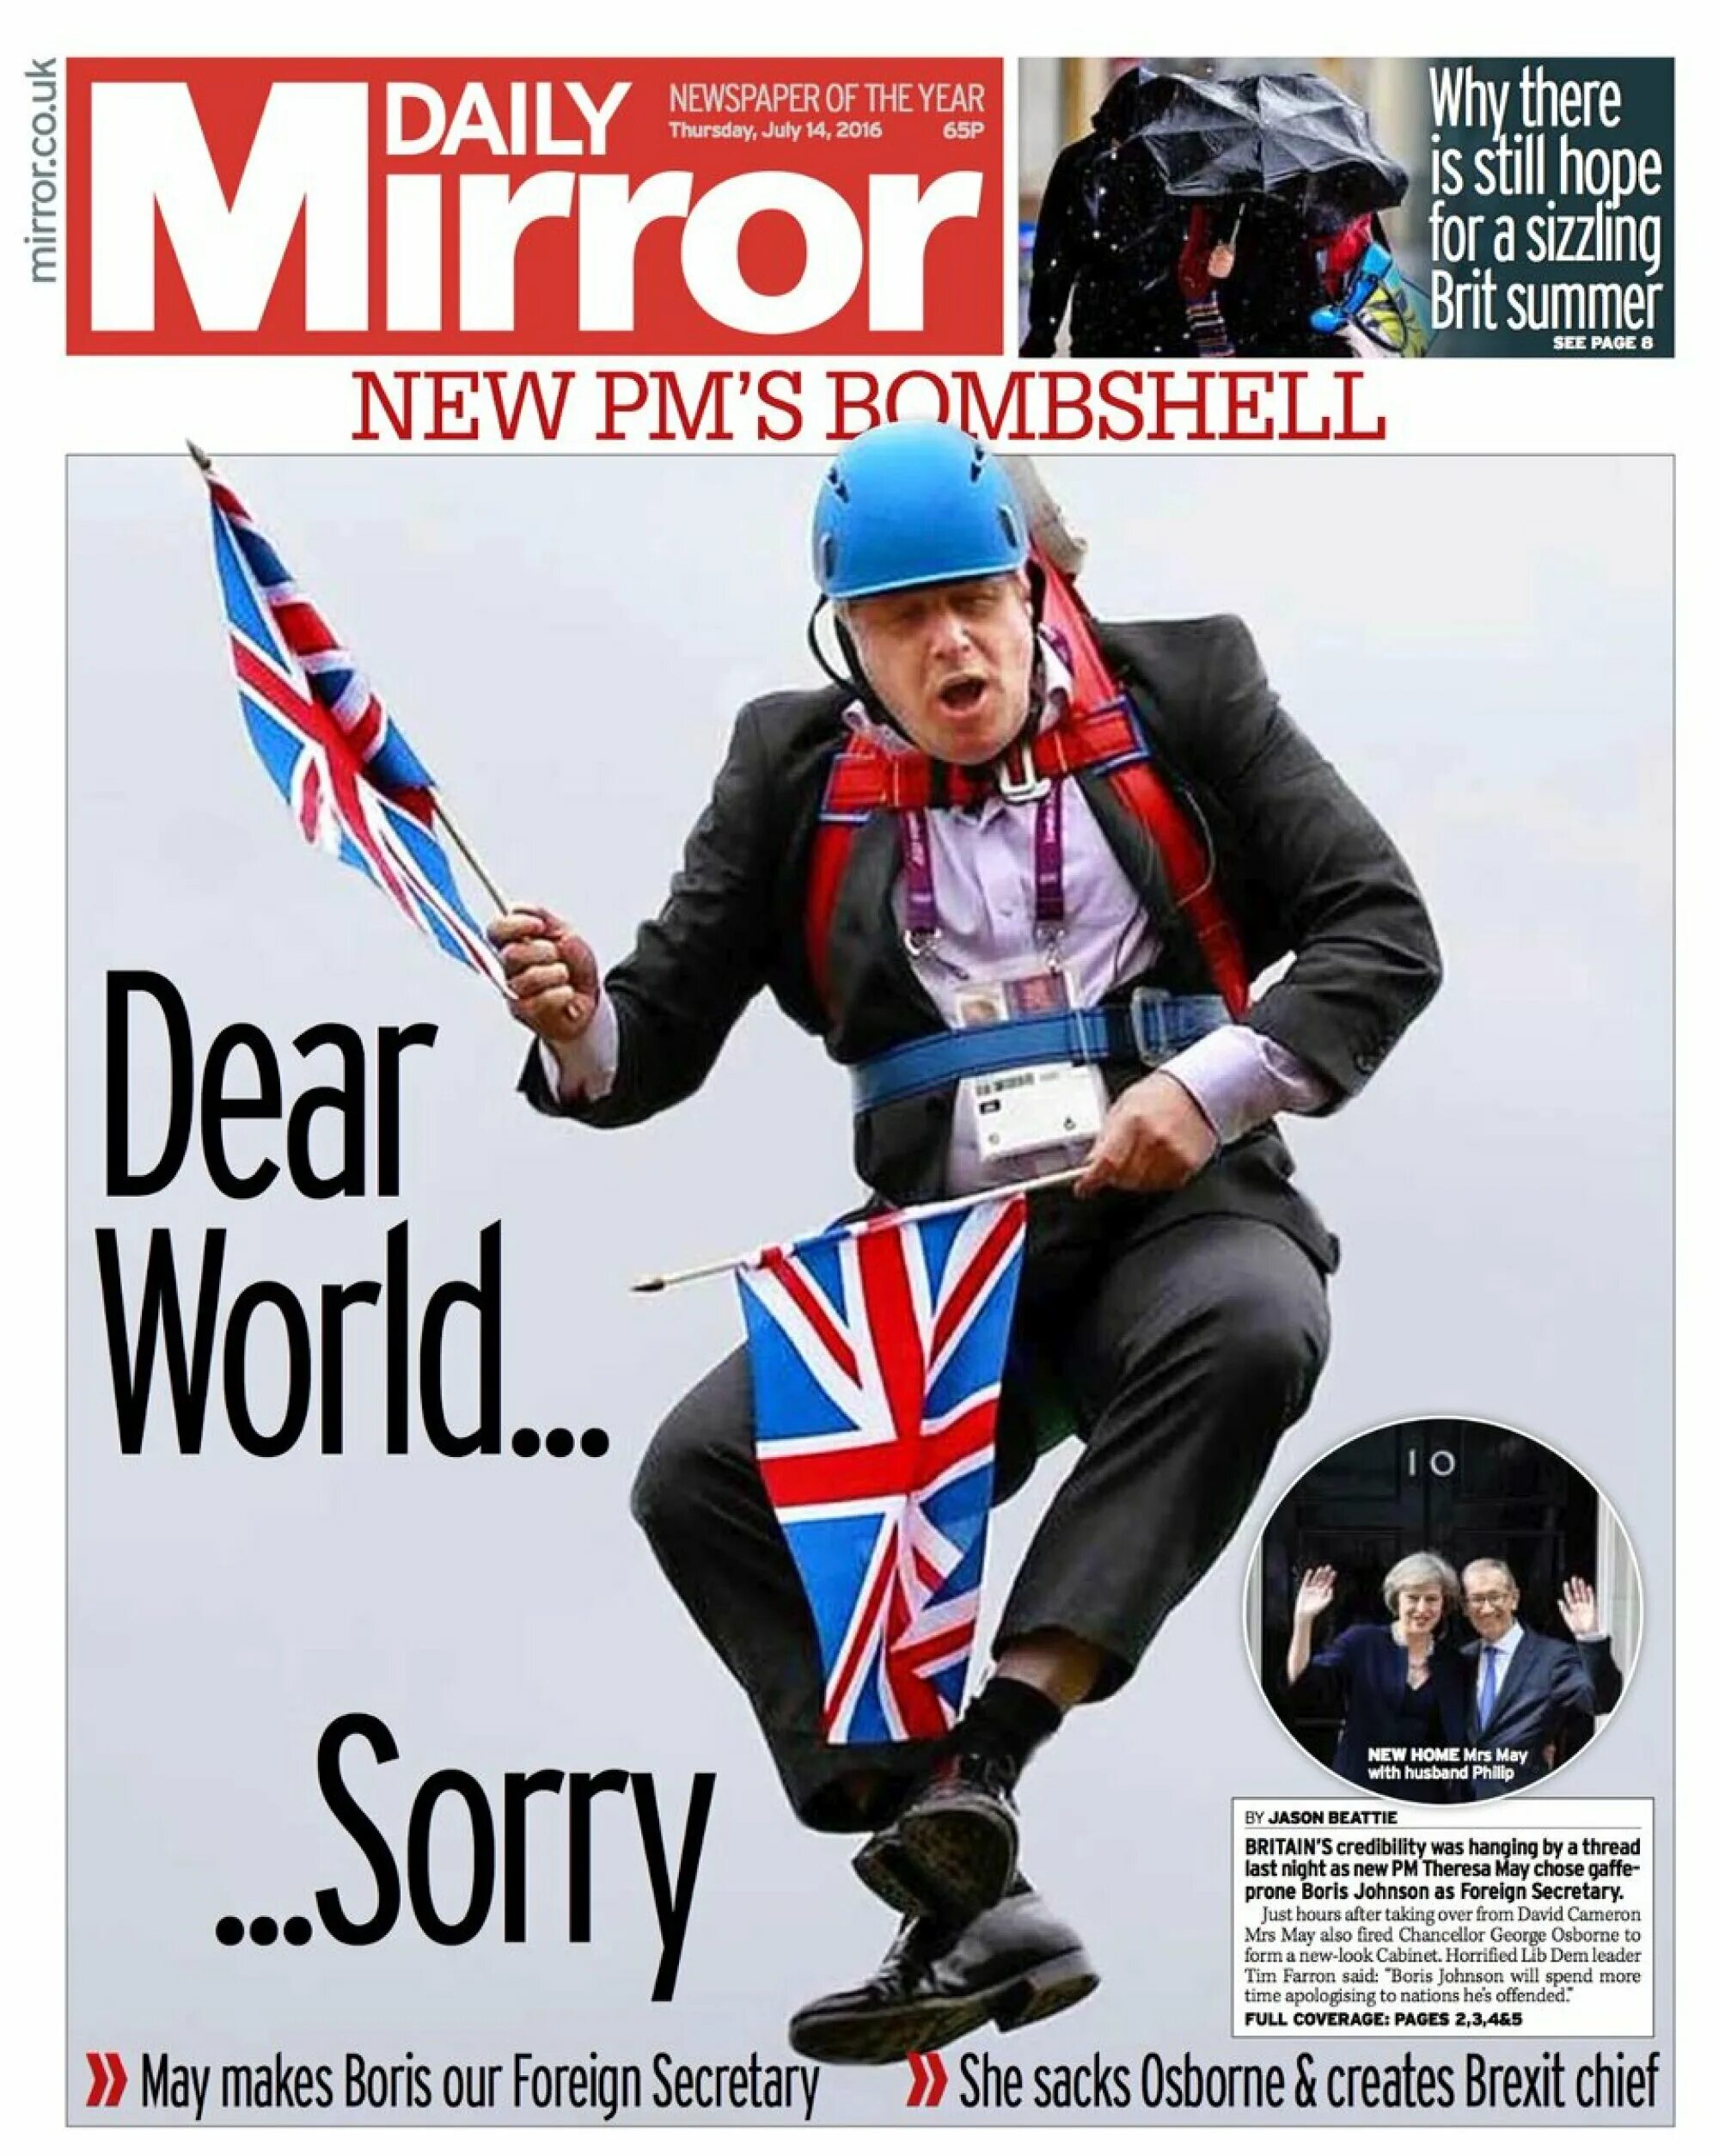 The newspaper come. Британцы извиняются. Neil Henderson. The Daily Mirror the Daily Mirror is a British Natio. Sorry British.